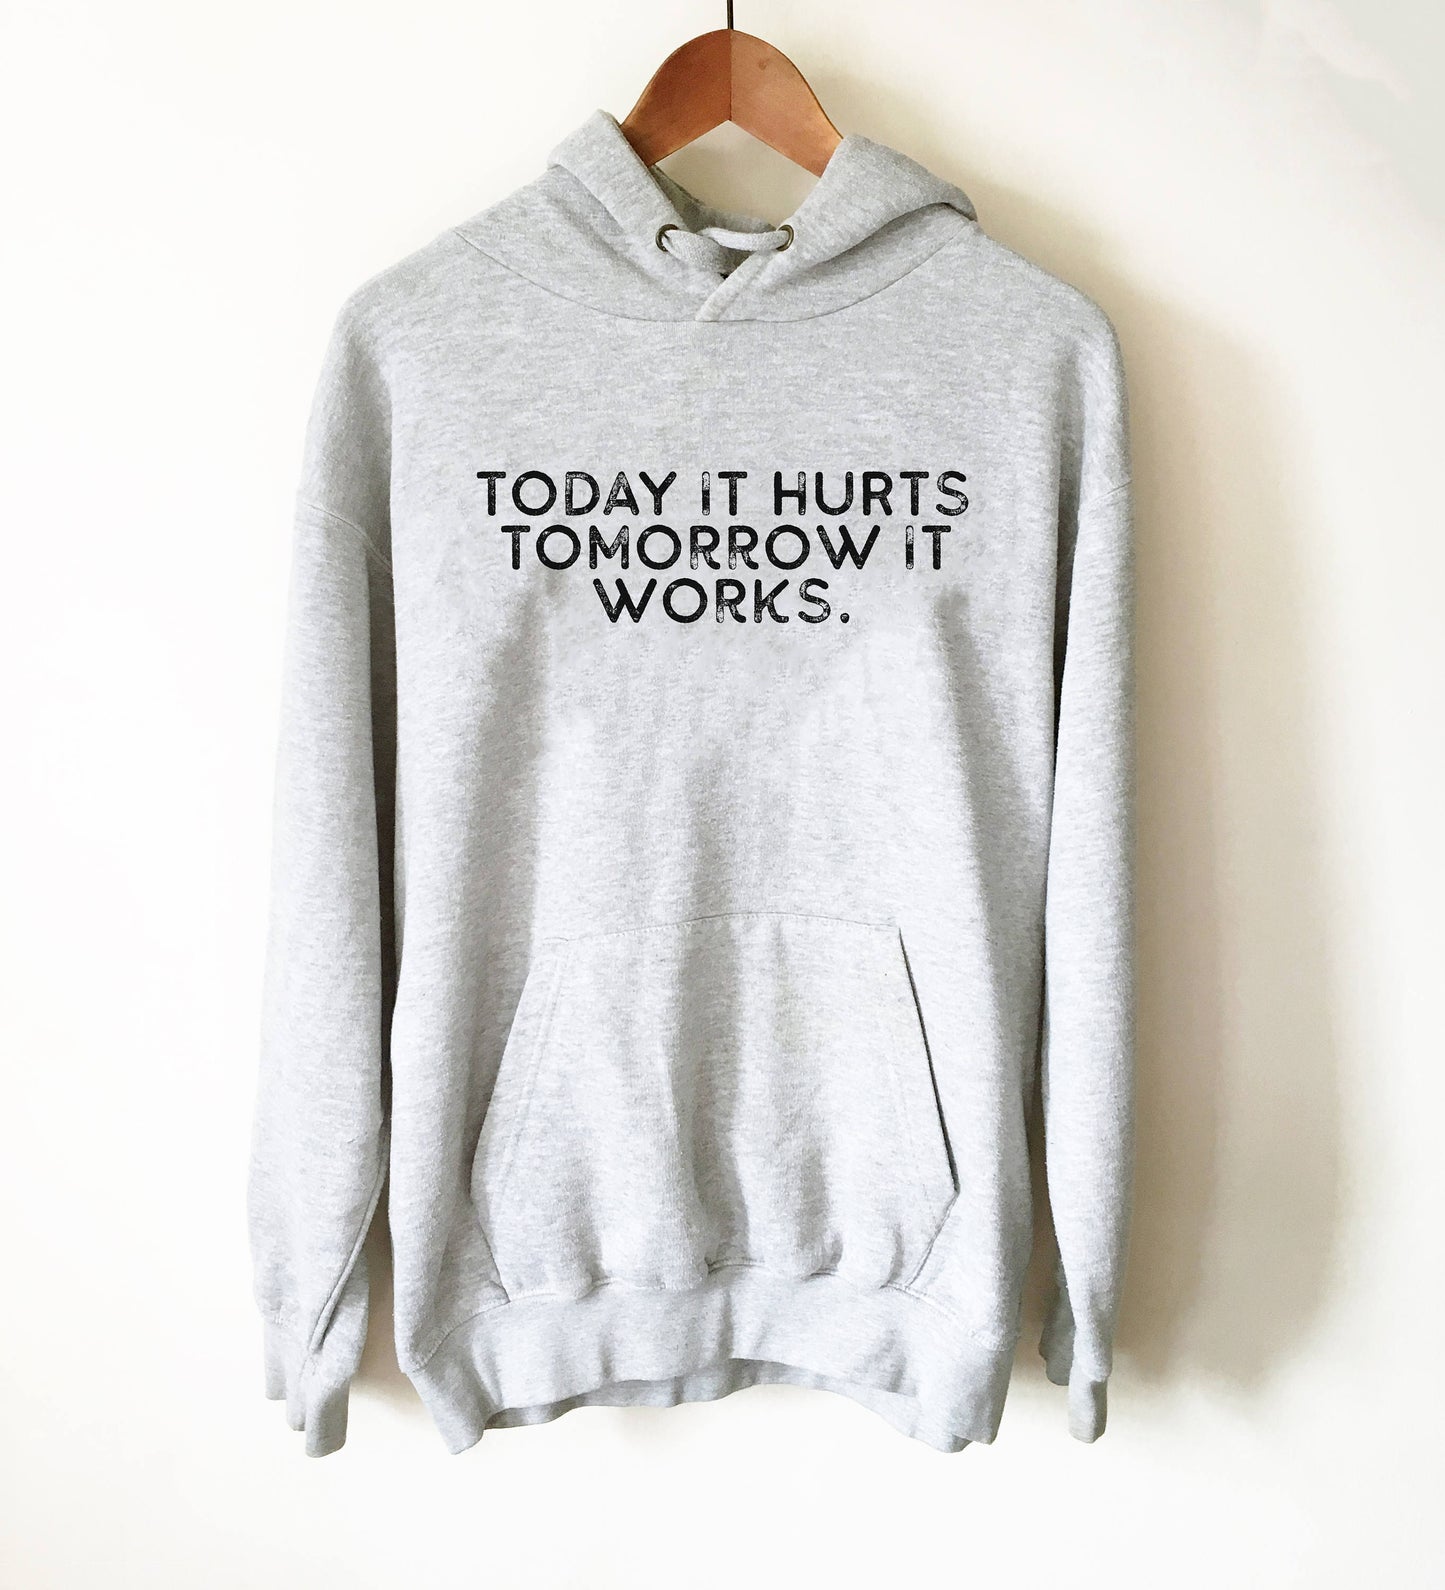 Today It Hurts Tomorrow It Works Hoodie - Physical Therapy, Physical Therapist, Massage Therapist, Chiropractor Gift, Chiropractor Student